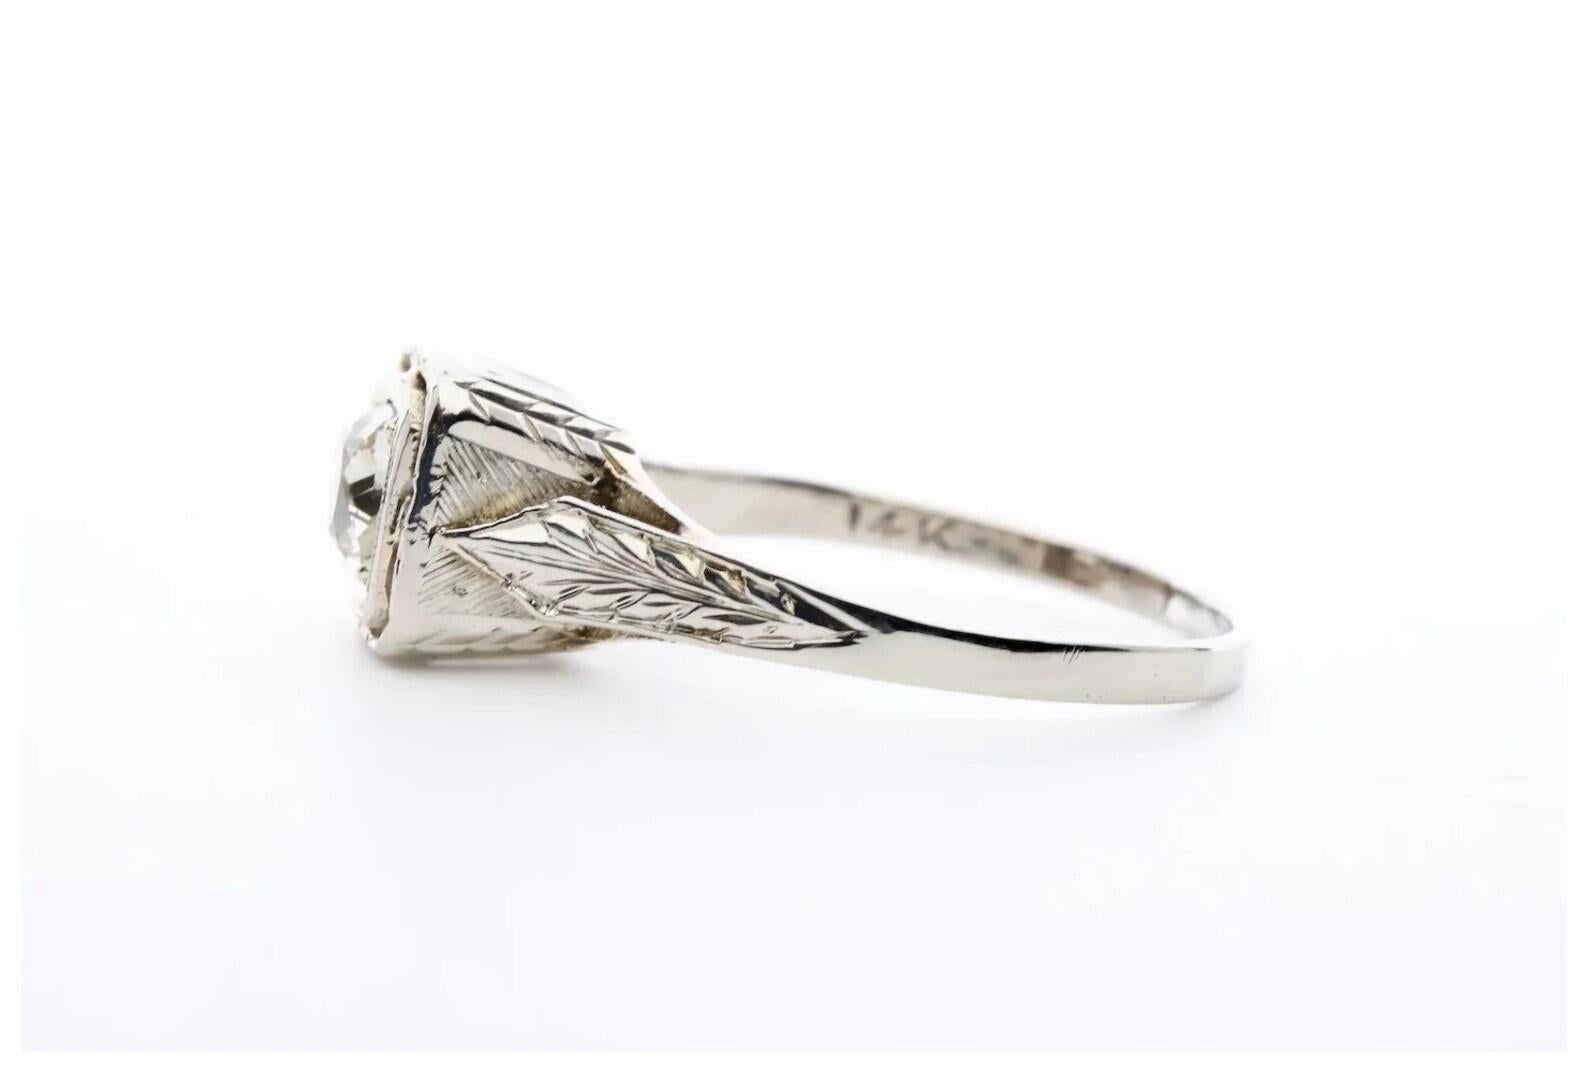 Engraved Art Deco 0.52ct Old Mine Cut Diamond Engagement Ring in 18K White Gold In Good Condition For Sale In Boston, MA